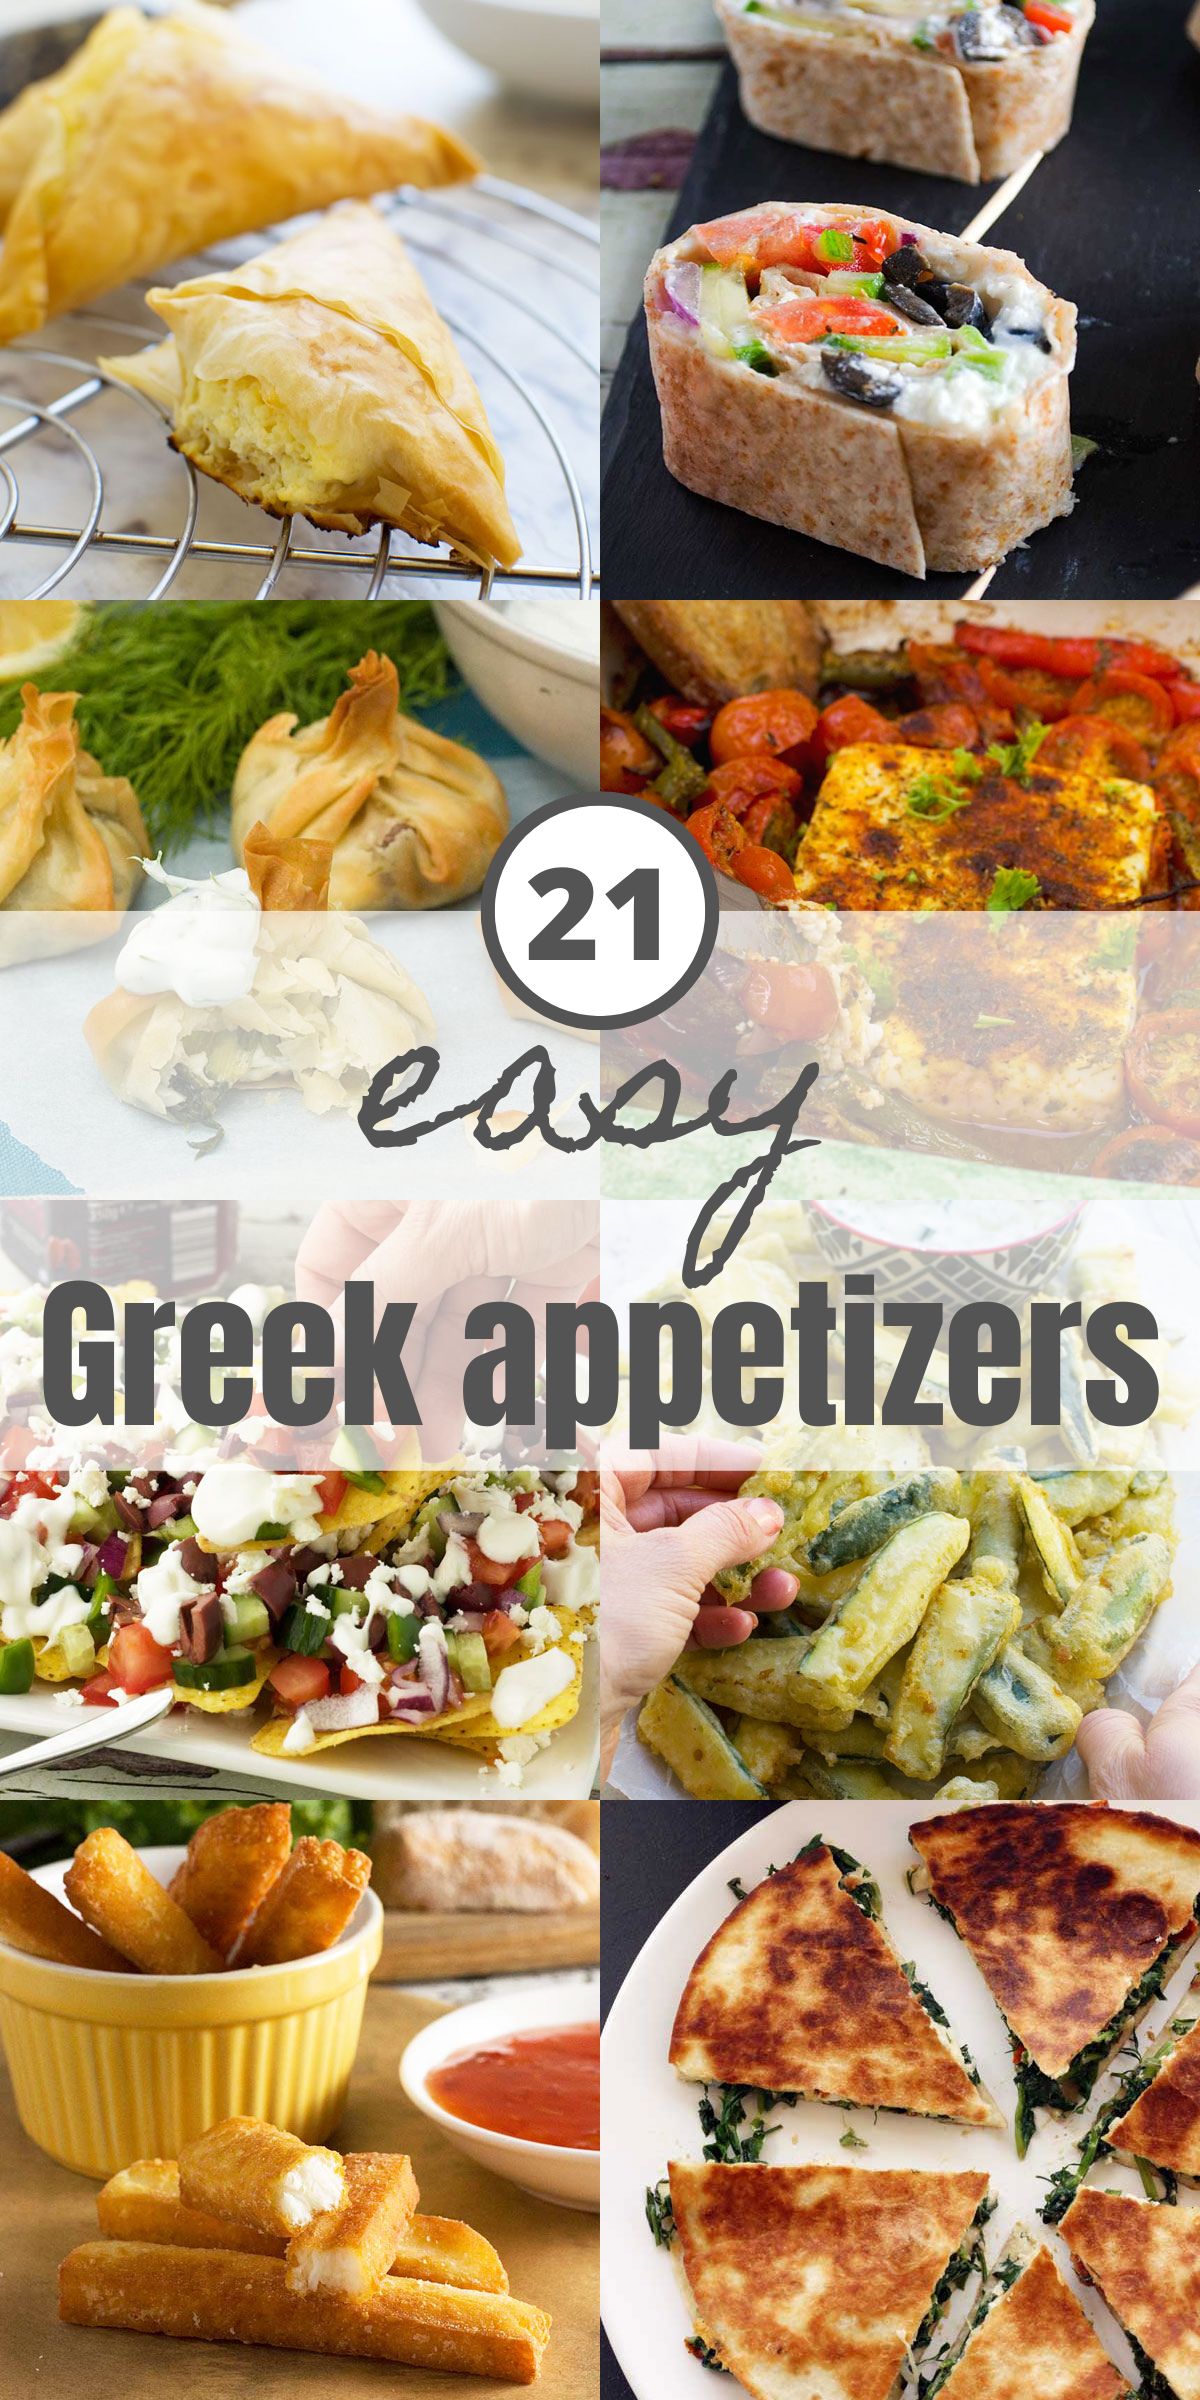 Collage of 8 images showing different Greek appetizers including halloumi fries, Greek quesadillas, zucchini fries, pinwheels, baked feta, Greek nachos and mini pies with a title across the middle that says 21 Easy Greek appetizers.